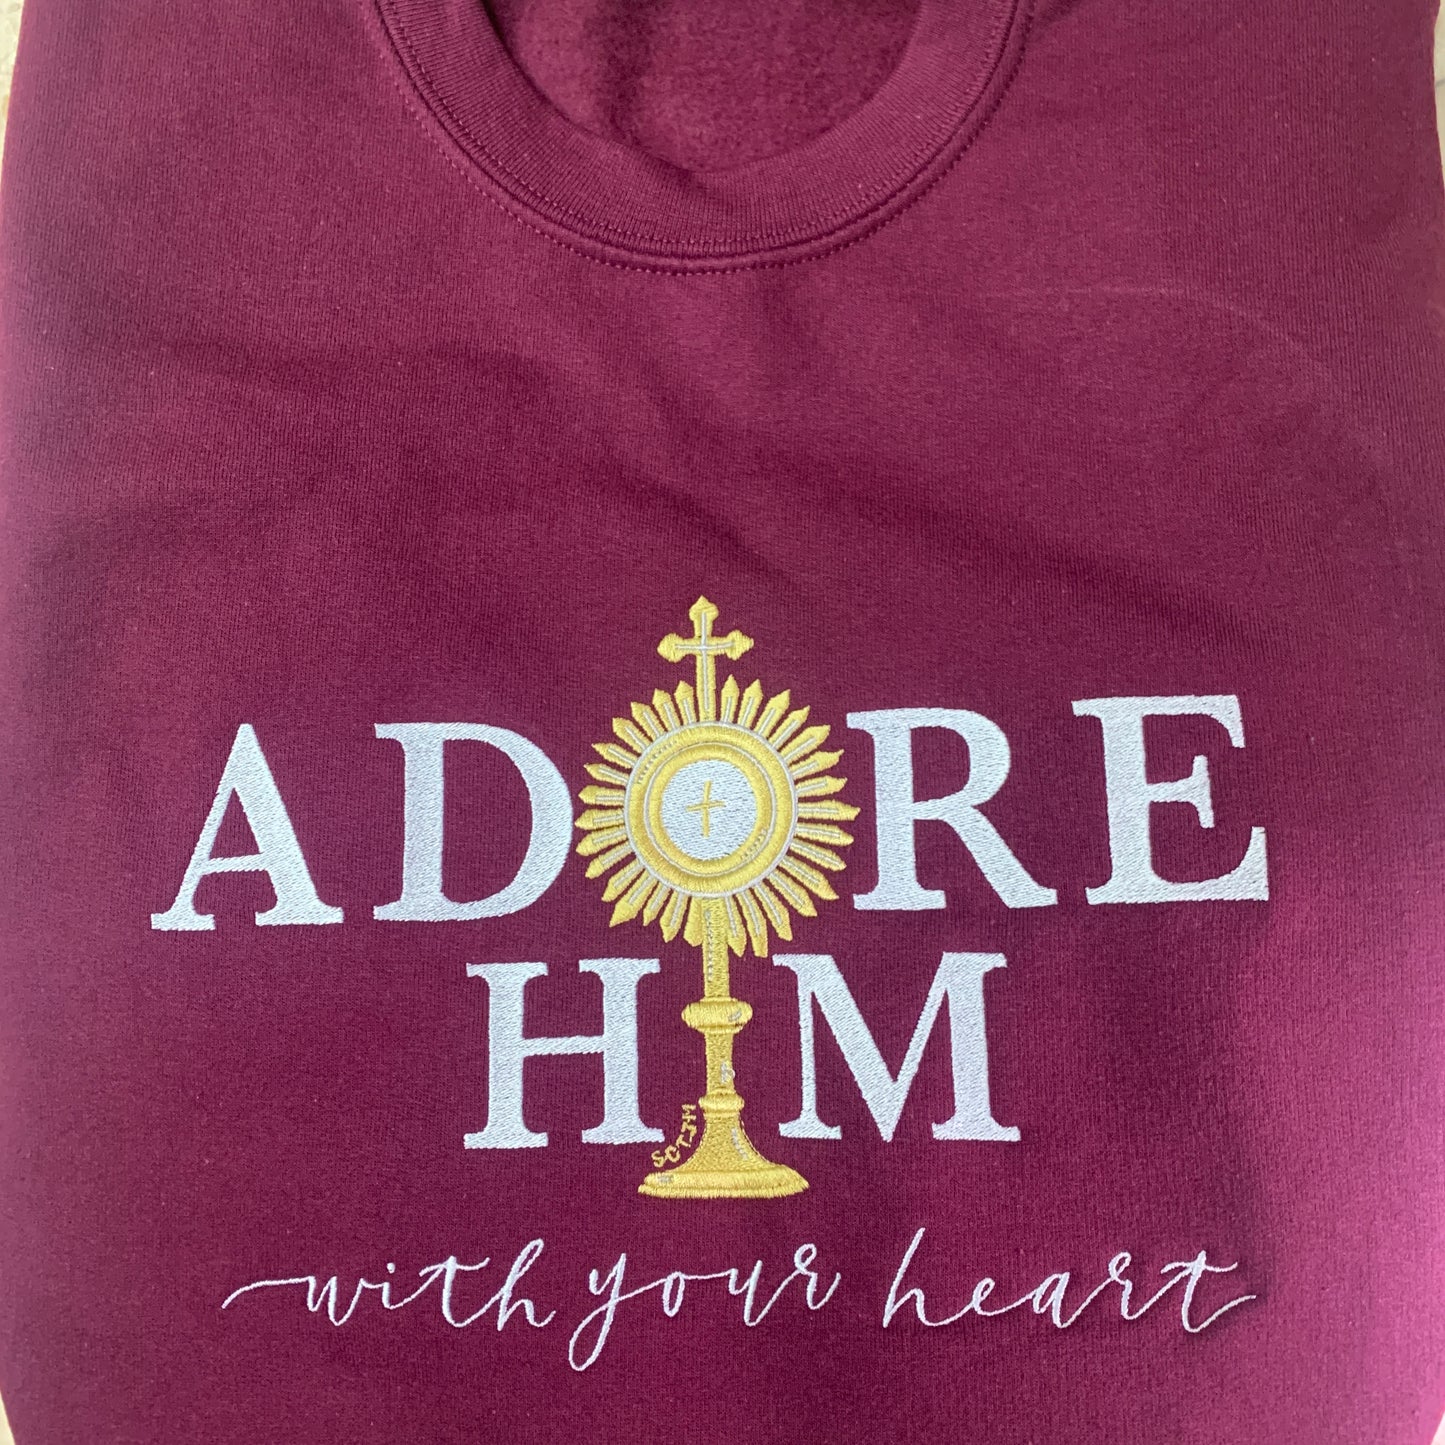 "Adore Him With Your Heart" Embroidered Crewneck Sweater by SCTJM